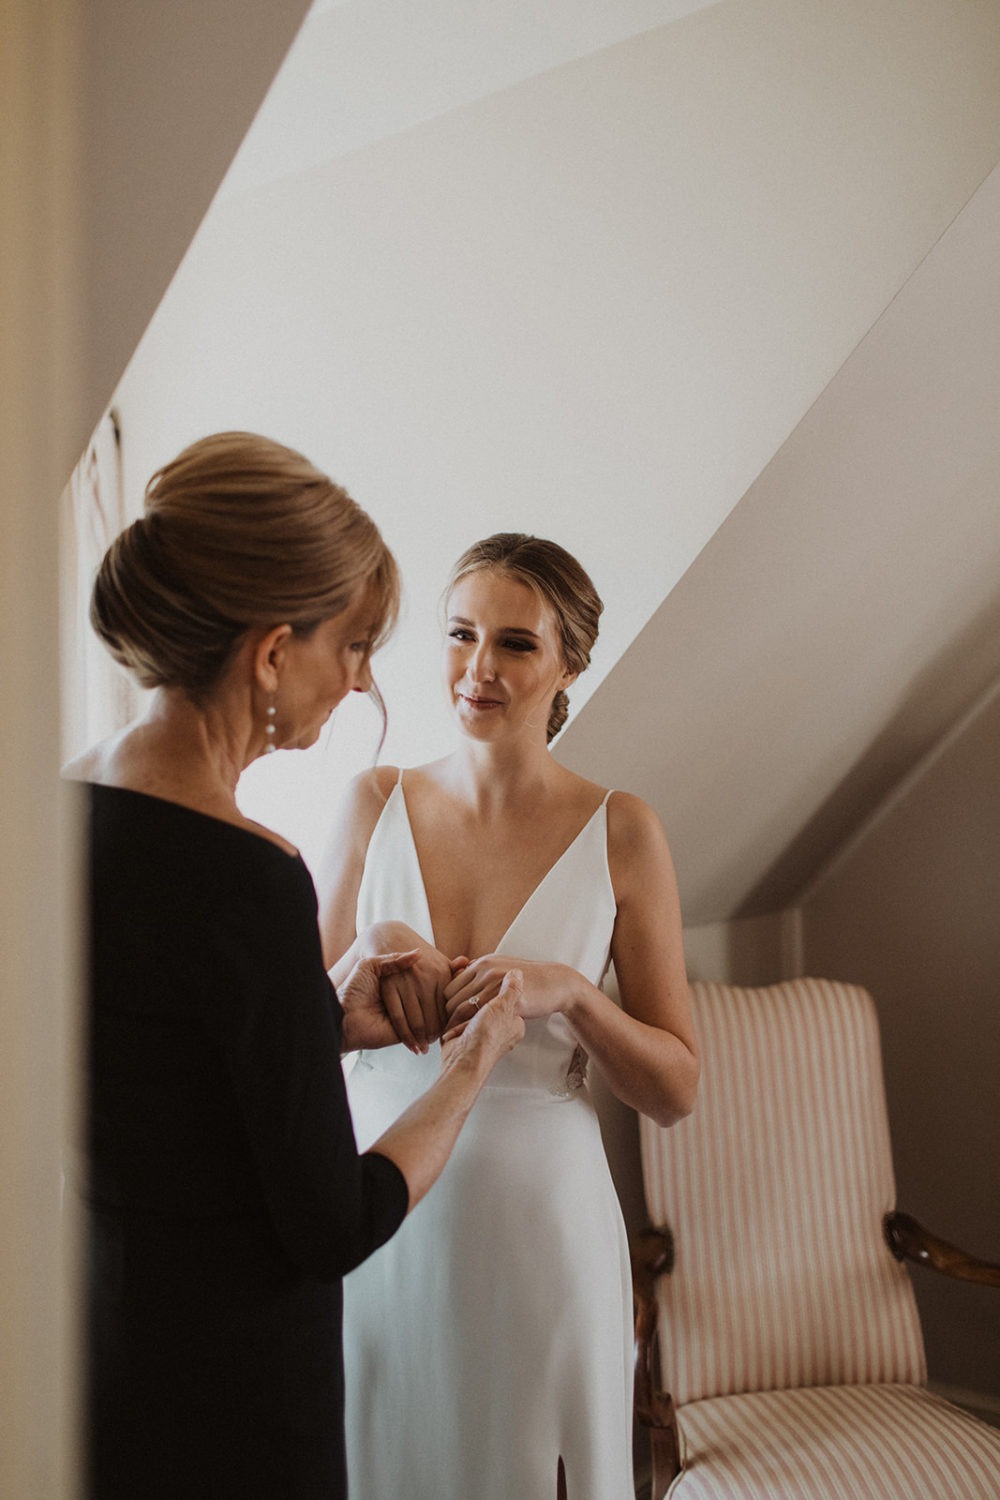 Mom holds bride's hands as she gets ready for her intimate wedding